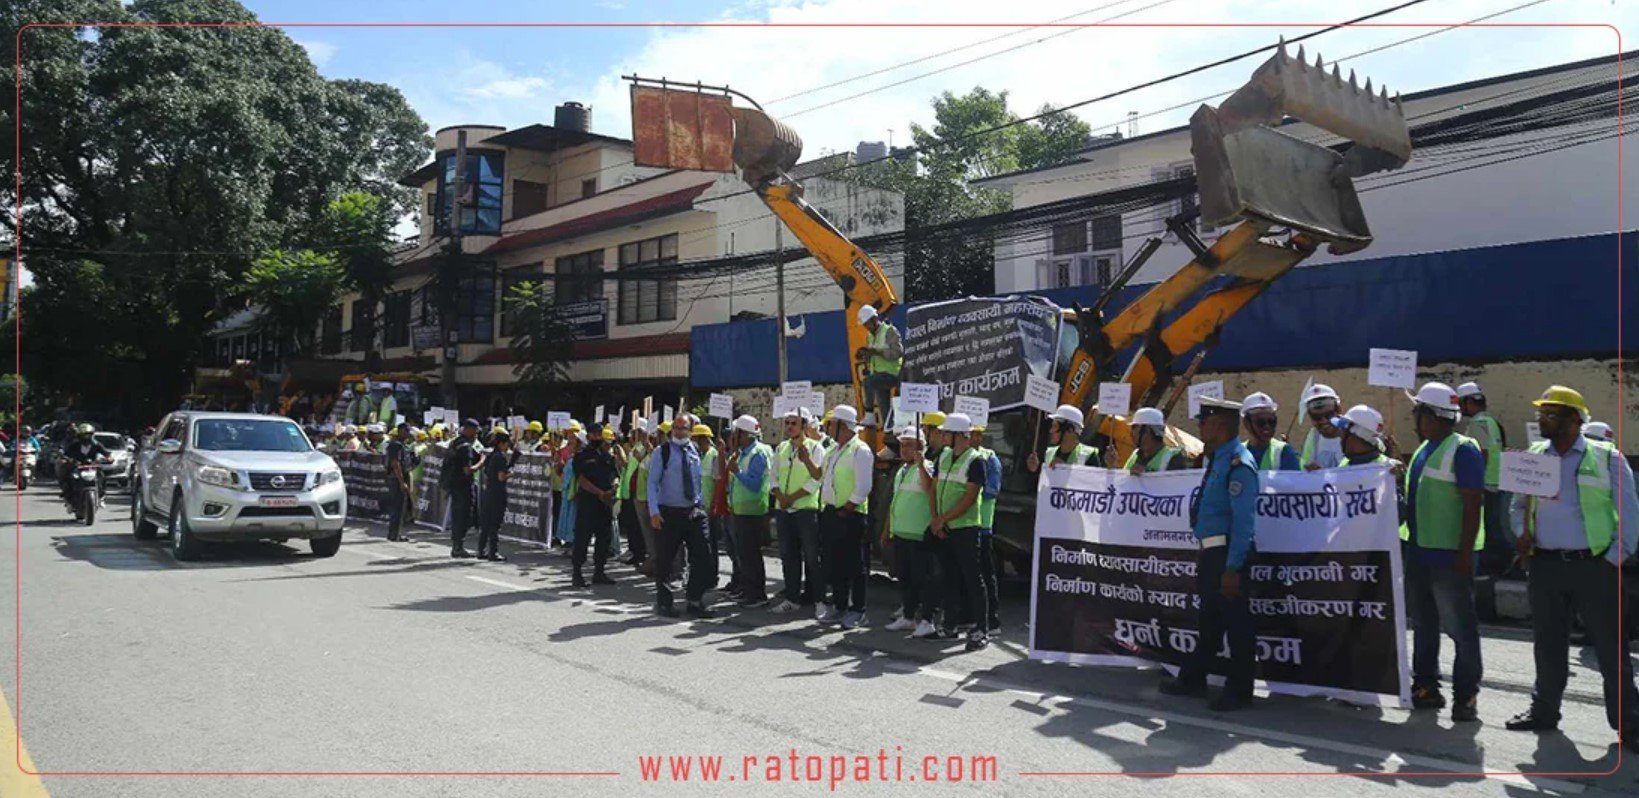 Construction workers demonstrate a protest in Baluwatar with dozers